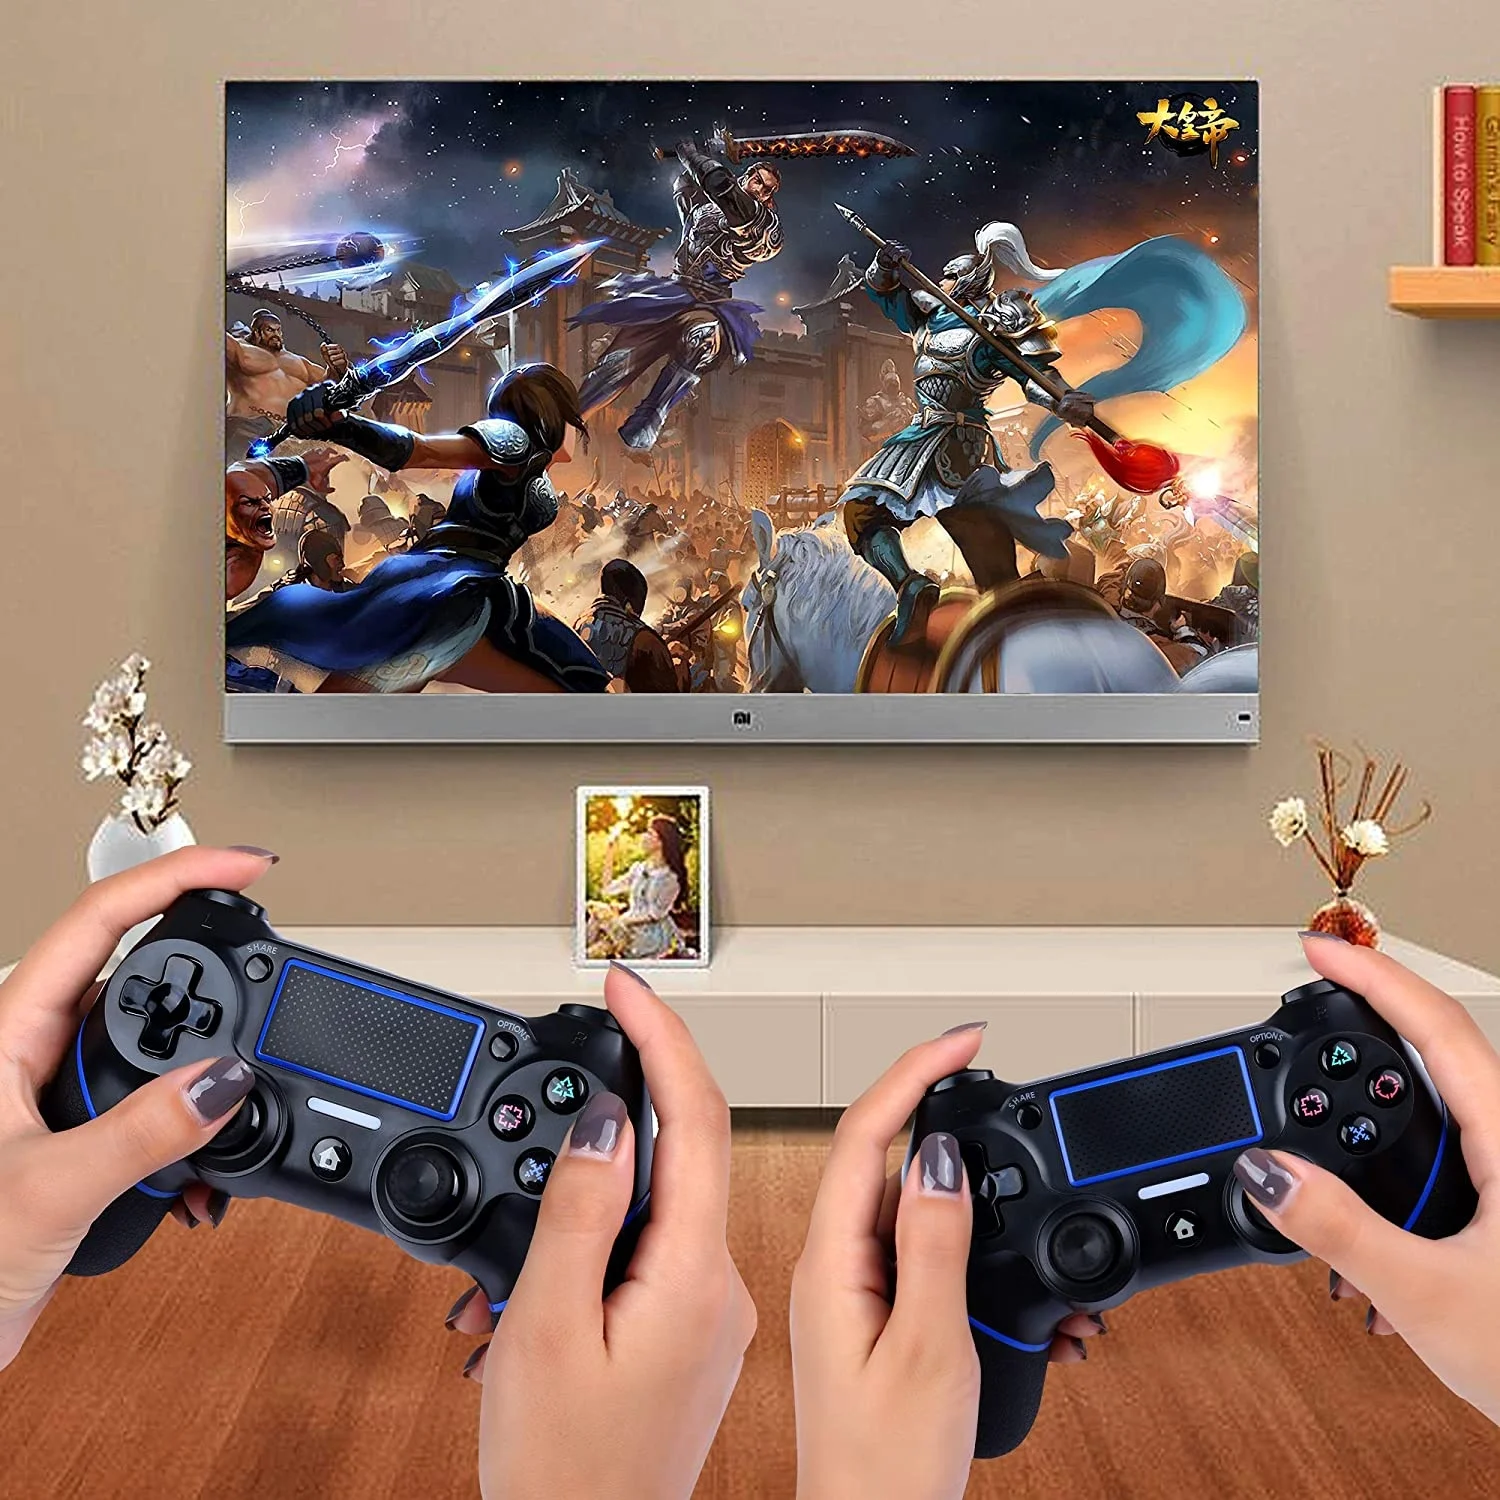 

Touch Panel with Dual Vibration Gamepad Wireless Joystick Controller for Dualshock Playstation 4 Controller Wireless PS4 Console, 3 colors